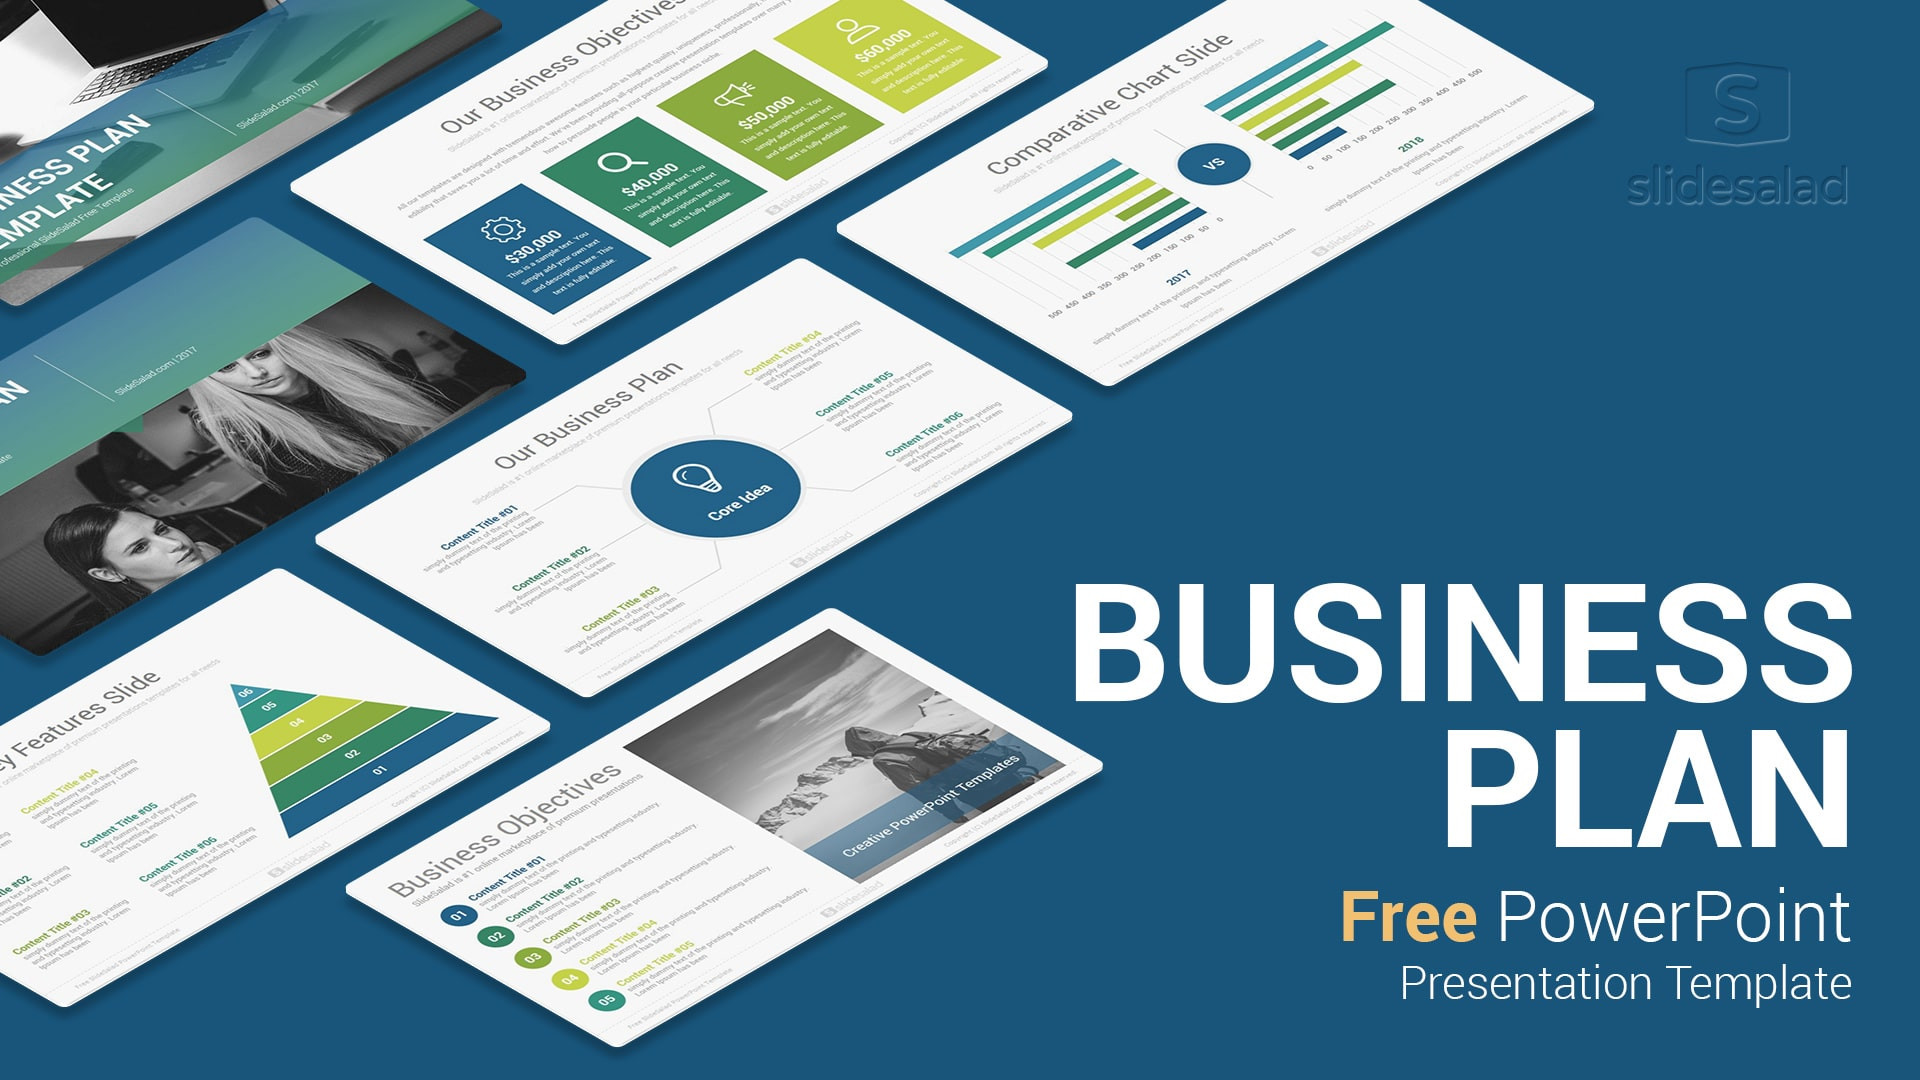 Business Plan Free Powerpoint Presentation Te Slidesalad Ppt Of Business Card Powerpoint Templates Free